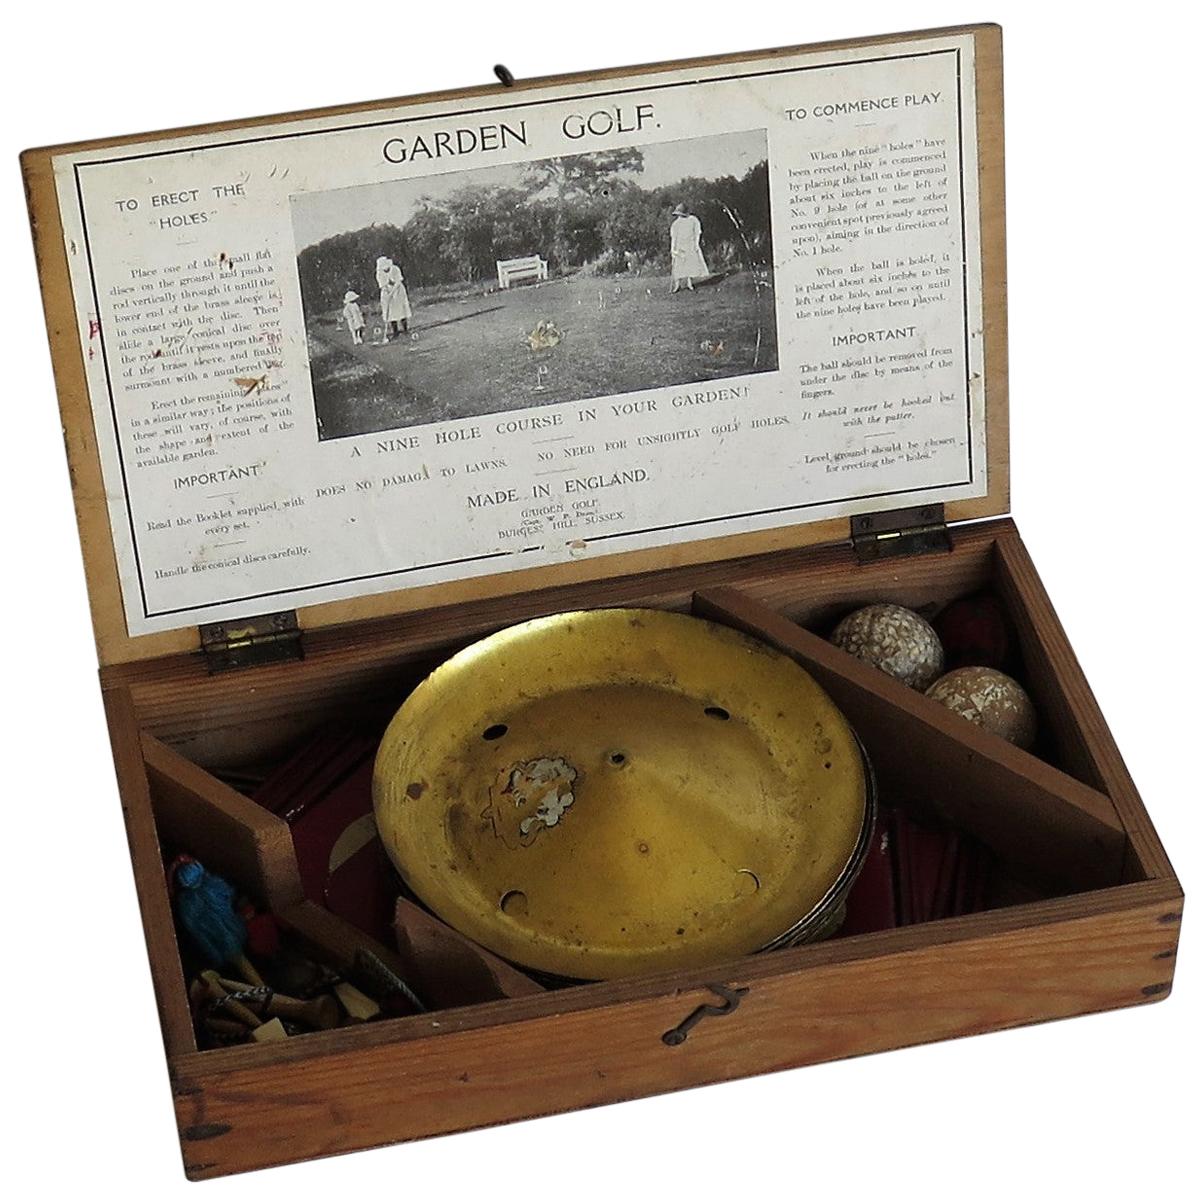 Garden Golf Game 9 Hole Set in Lidded Wood Box, Early 20th Century